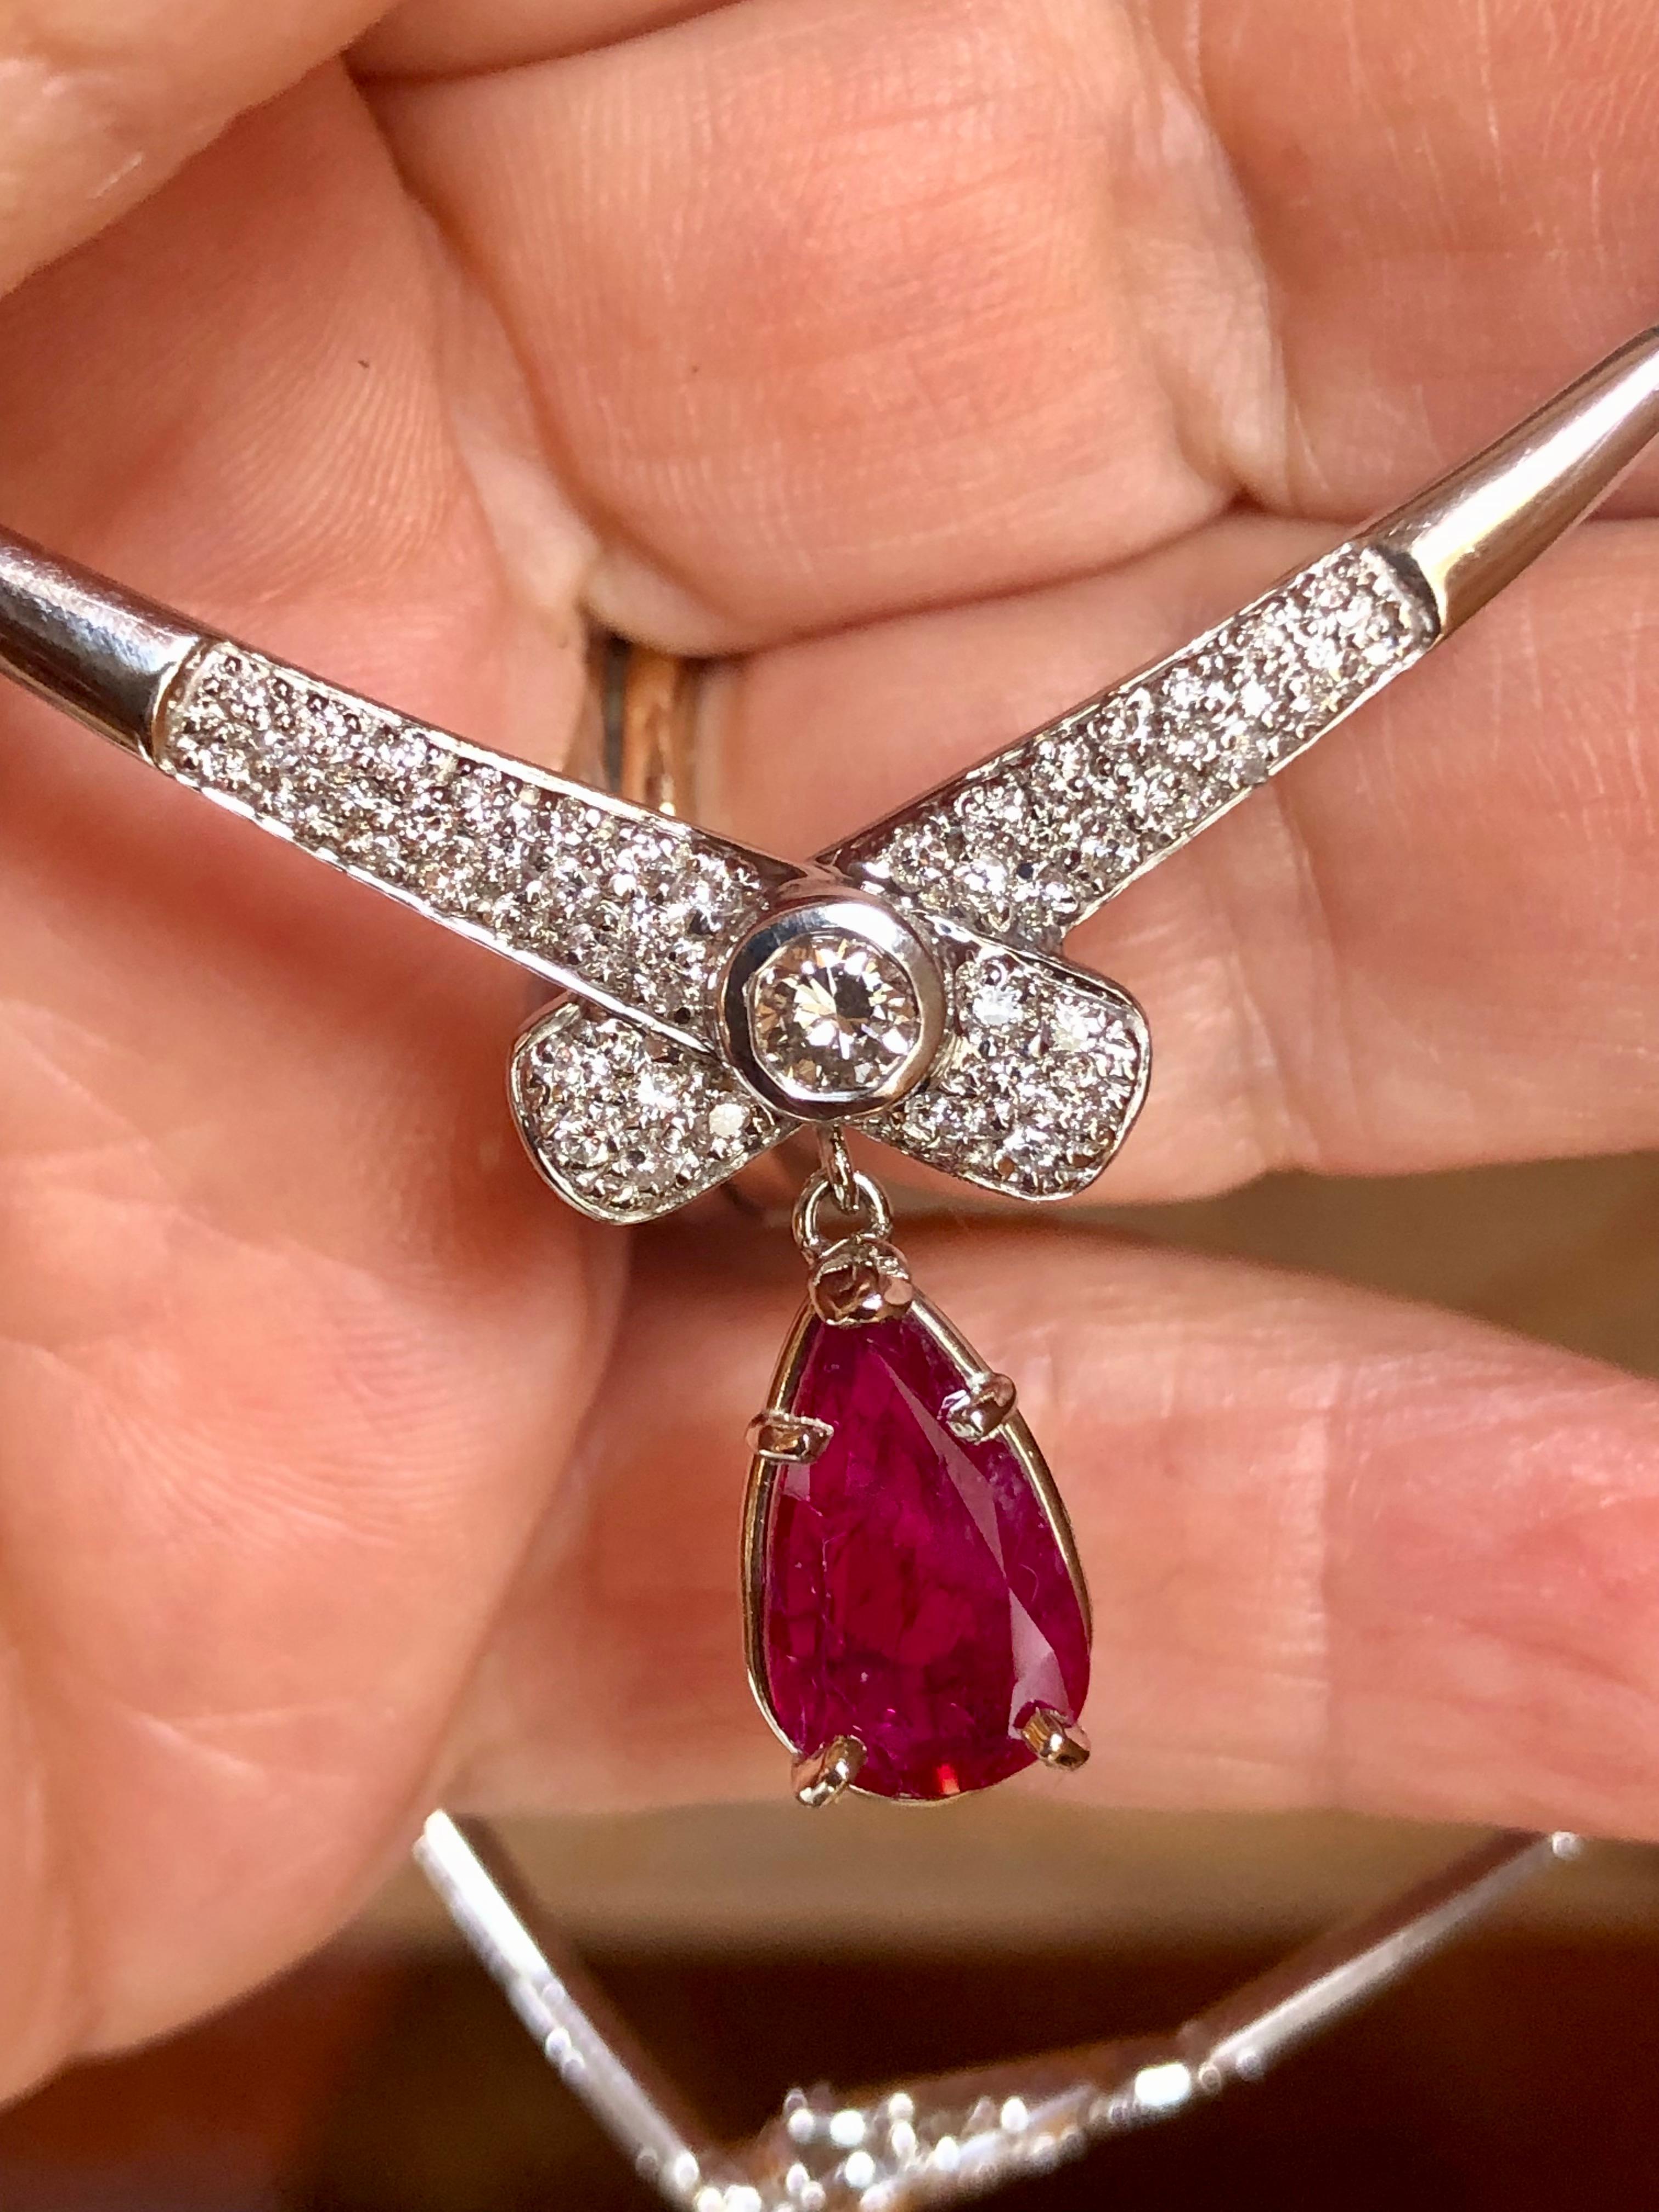 ESTATE Necklace Featuring in the Center a Pear Cut Mozambique Natural Ruby Weighing 2.30 carats, Not Treated. The ruby is set in a beautiful vintage-inspired scroll setting. The center bow design of the necklace features a round brilliant cut